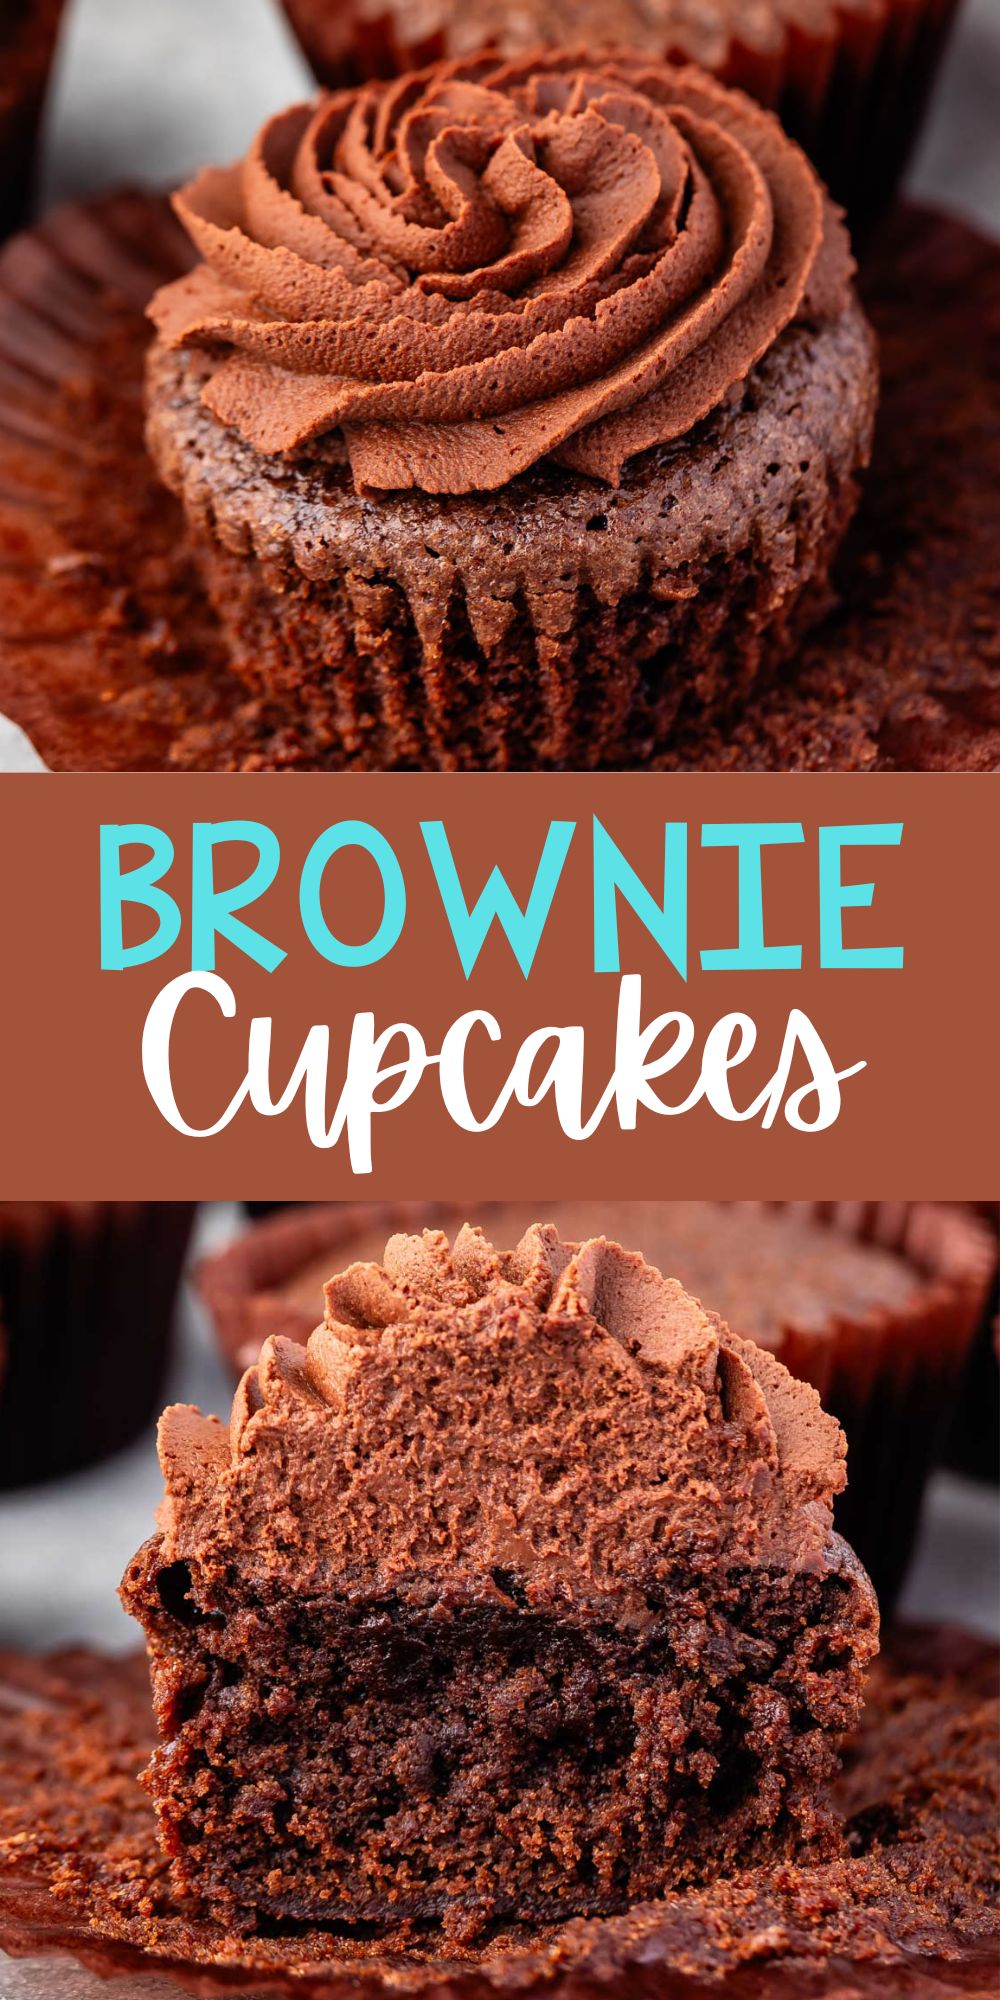 two photos of brownie cupcake with brown frosting with words on the image.